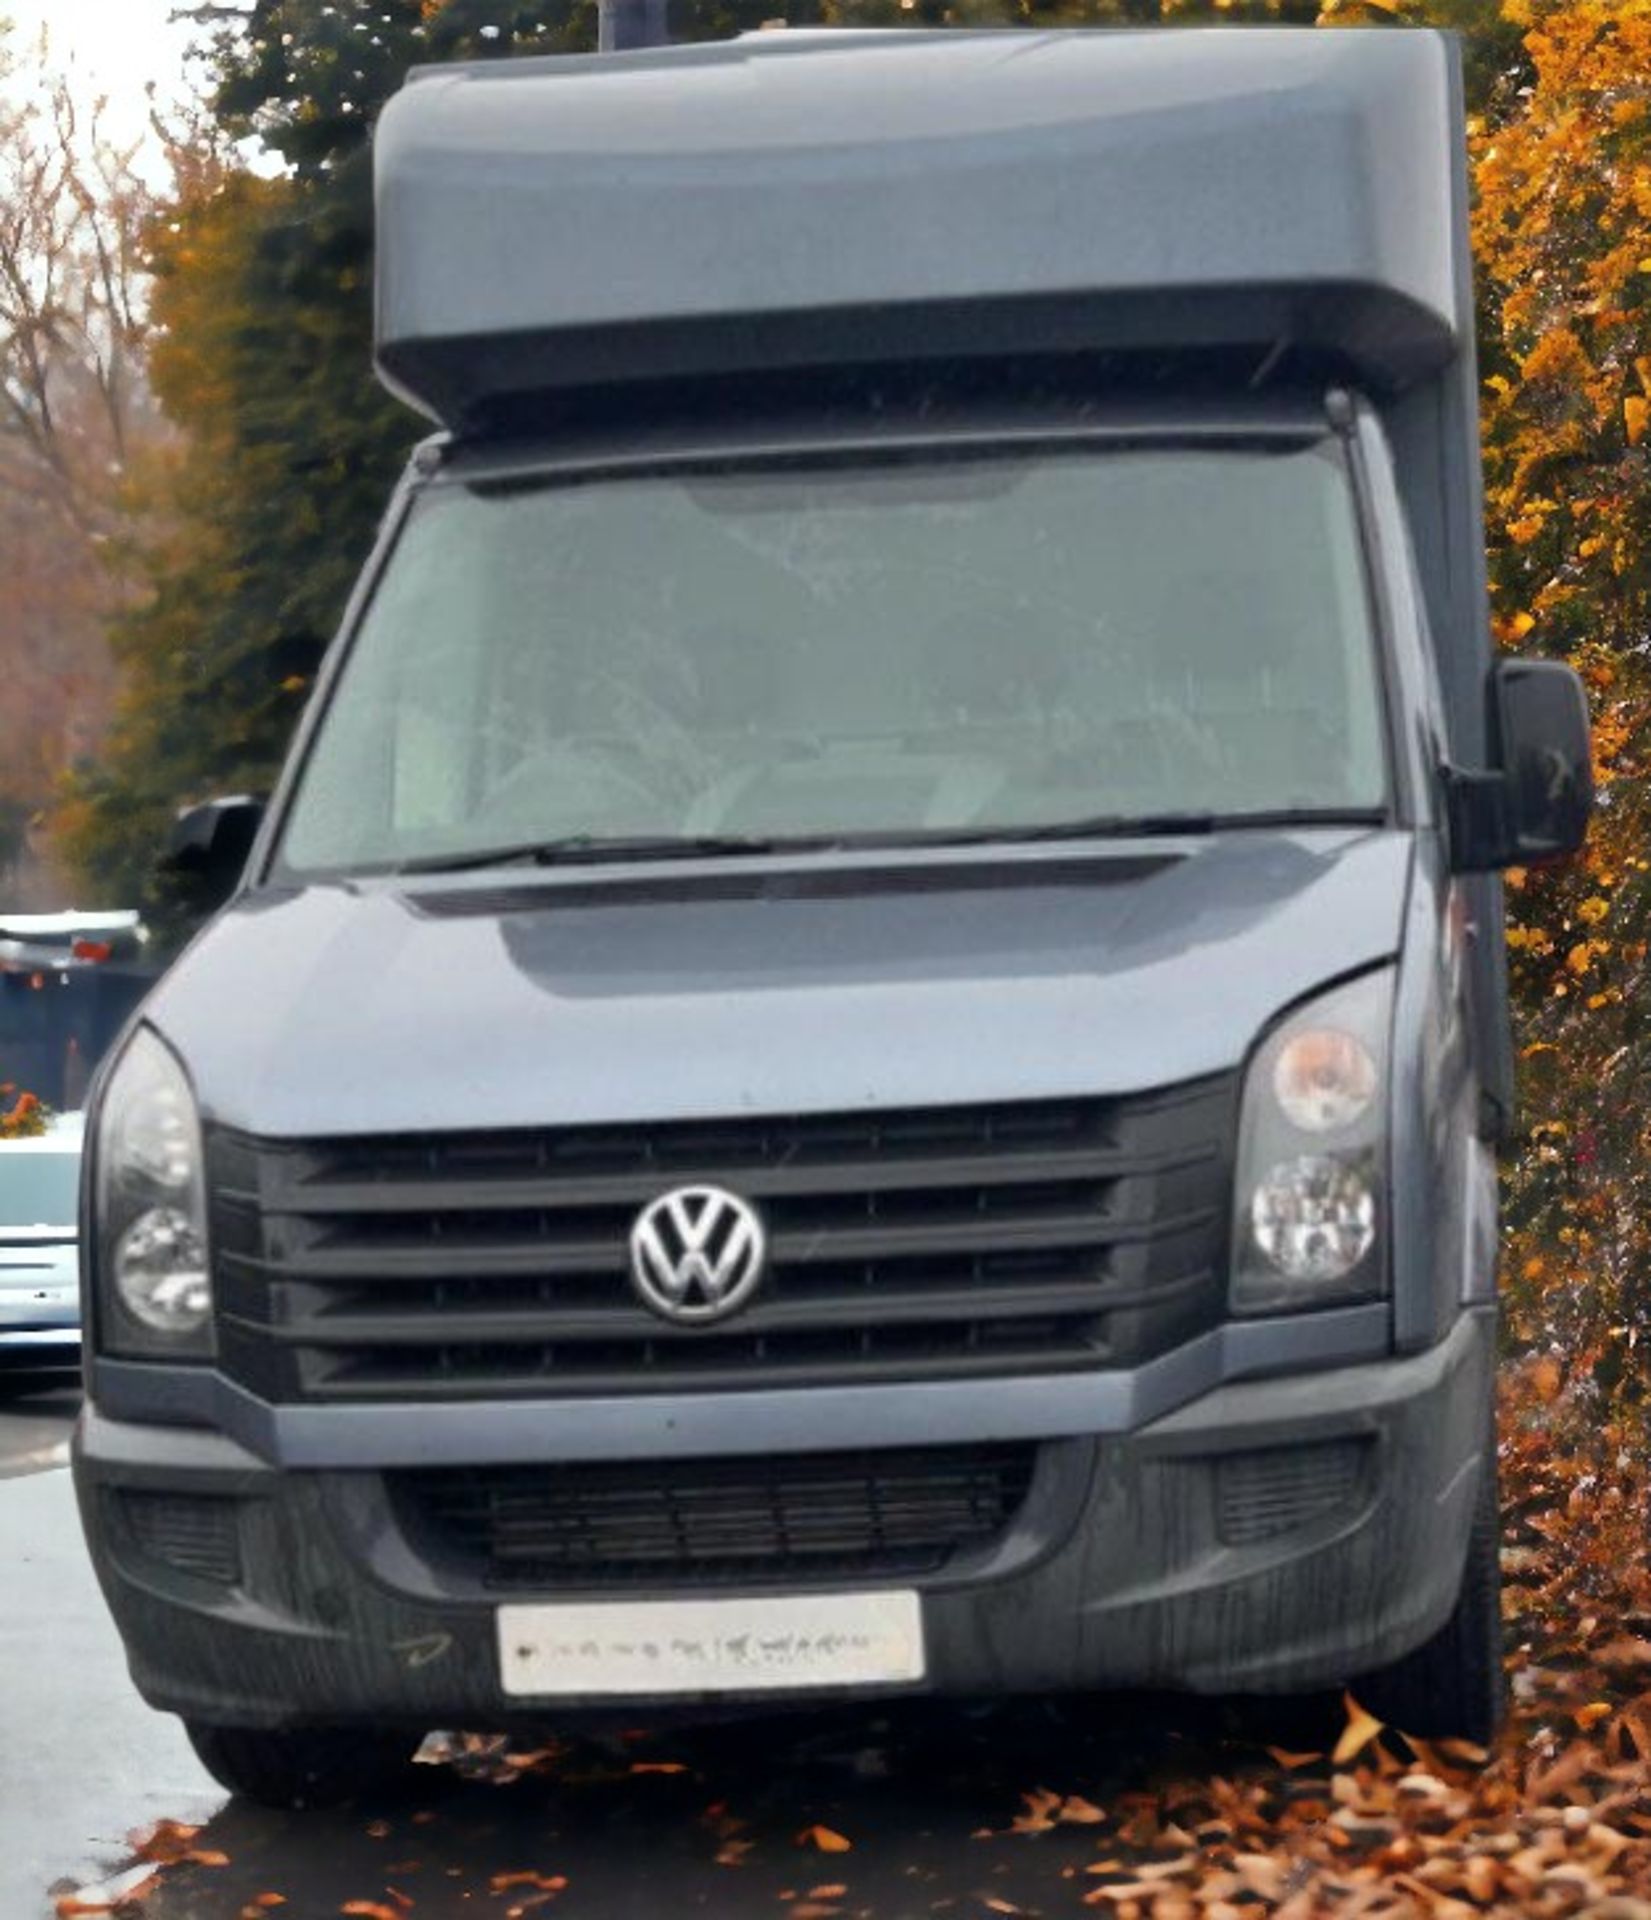 2014 VOLKSWAGEN CRAFTER CR35 TDI LWB LUTON VAN - YOUR RELIABLE MOVING PARTNER - Image 2 of 14